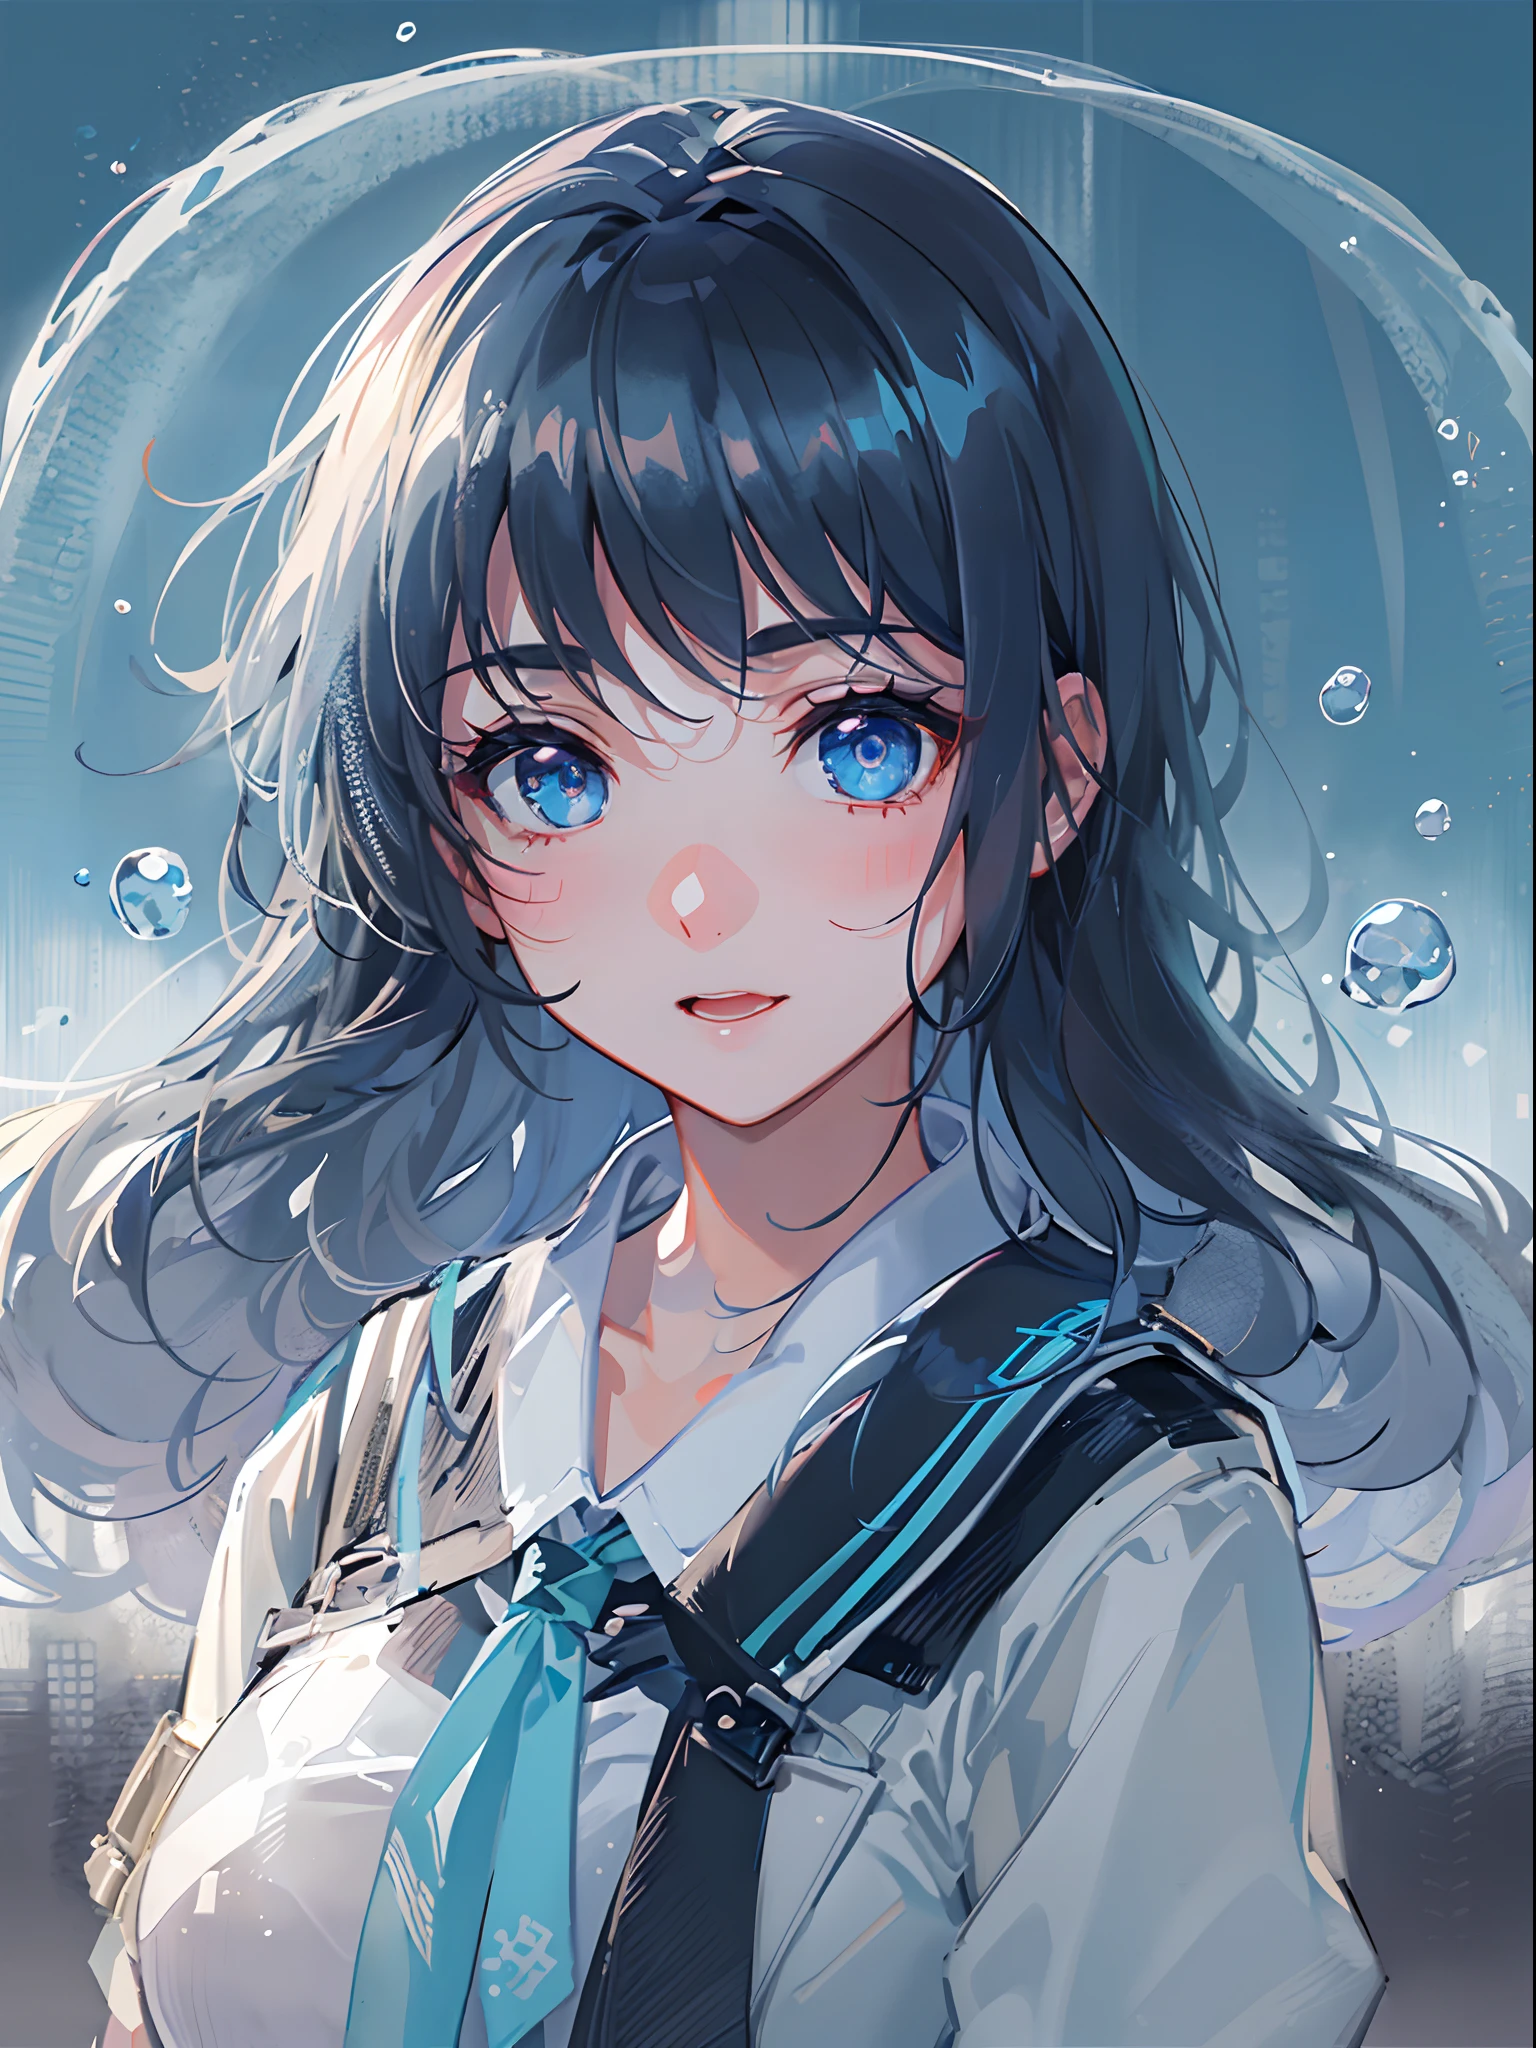 ((top-quality)), ((​masterpiece)), ((Ultra-detail)), (extremely delicate and beautiful), girl with, solo, cold attitude,((Black jacket)),She is very(relax)with  the(Settled down)Looks,A darK-haired, depth of fields,evil smile,Bubble, under the water, Air bubble,bright light blue eyes,Inner color with black hair and light blue tips,Cold background,Bob Hair - Linear Art, a miniskirt、knee high socks、White uniform like 、Light blue ribbon ties、Clothes are sheer、Hands in pockets、Half Up Hair